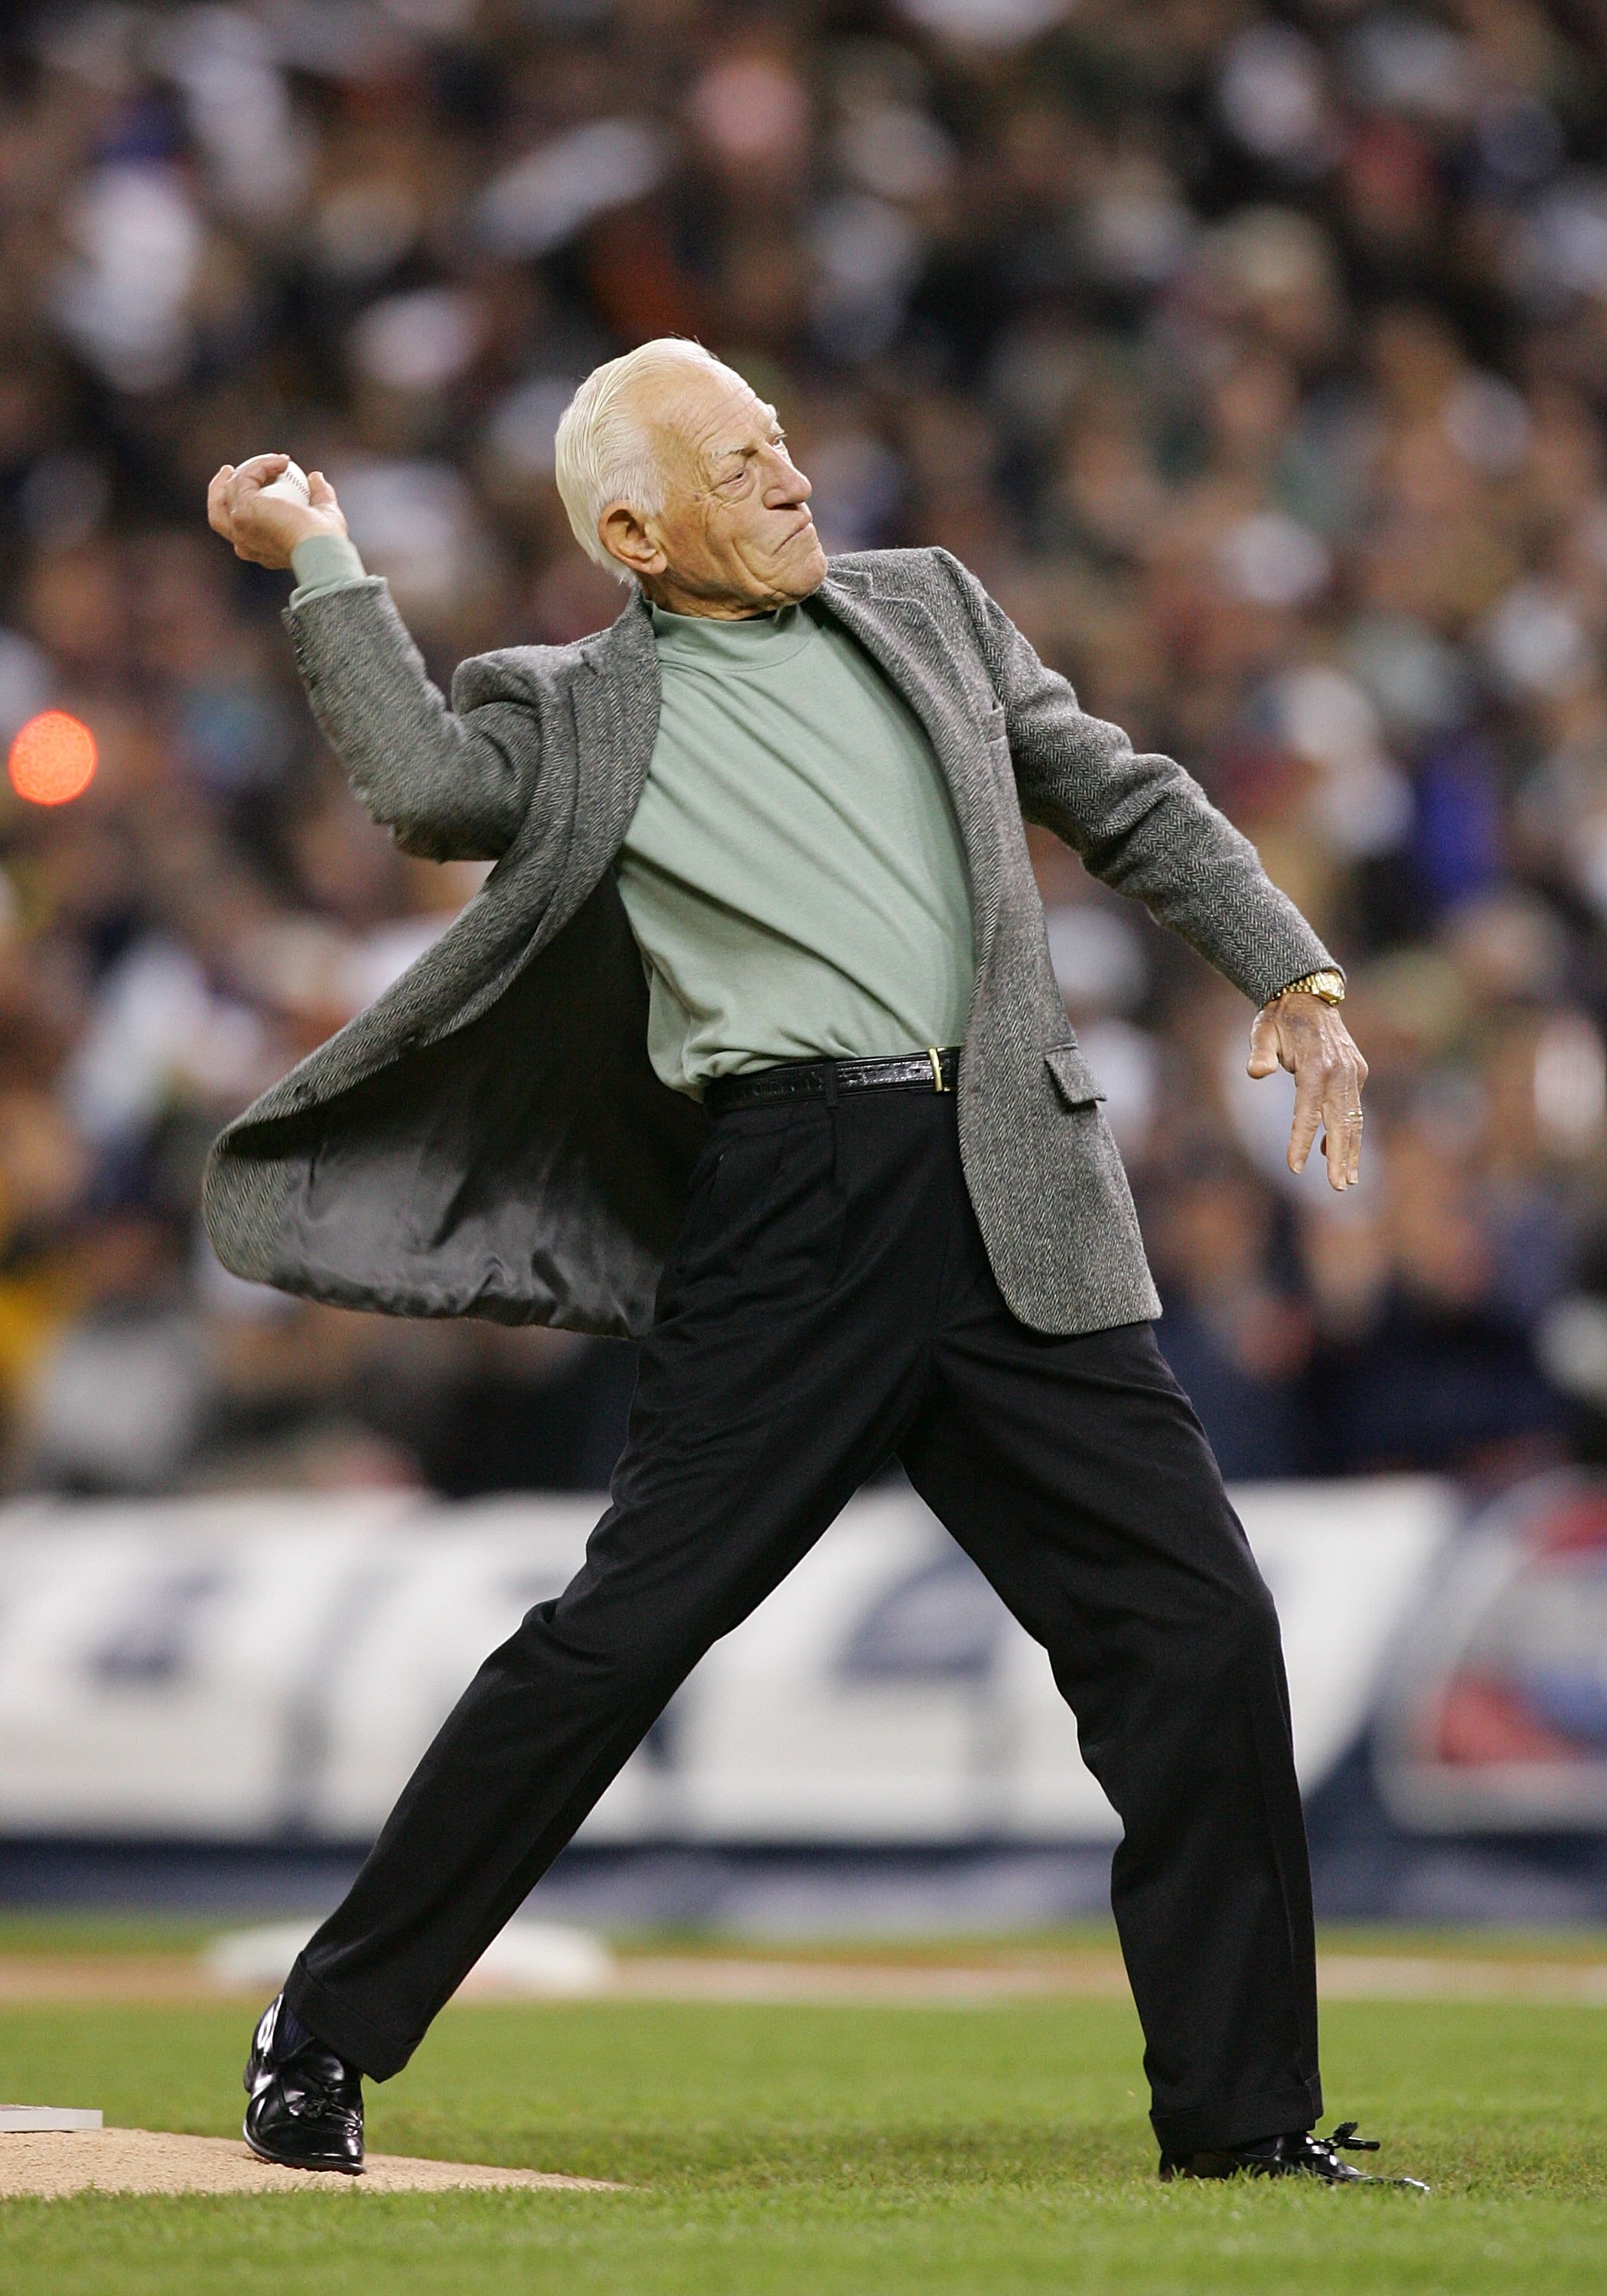 DETROIT - OCTOBER 22:  Former manager of the Detroit Tigers Sparky Anderson throws out the first pitch before the Tigers take on the St. Louis Cardinals during Game Two of 2006 World Series October 22, 2006 at Comerica Park in Detroit, Michigan.   (Photo